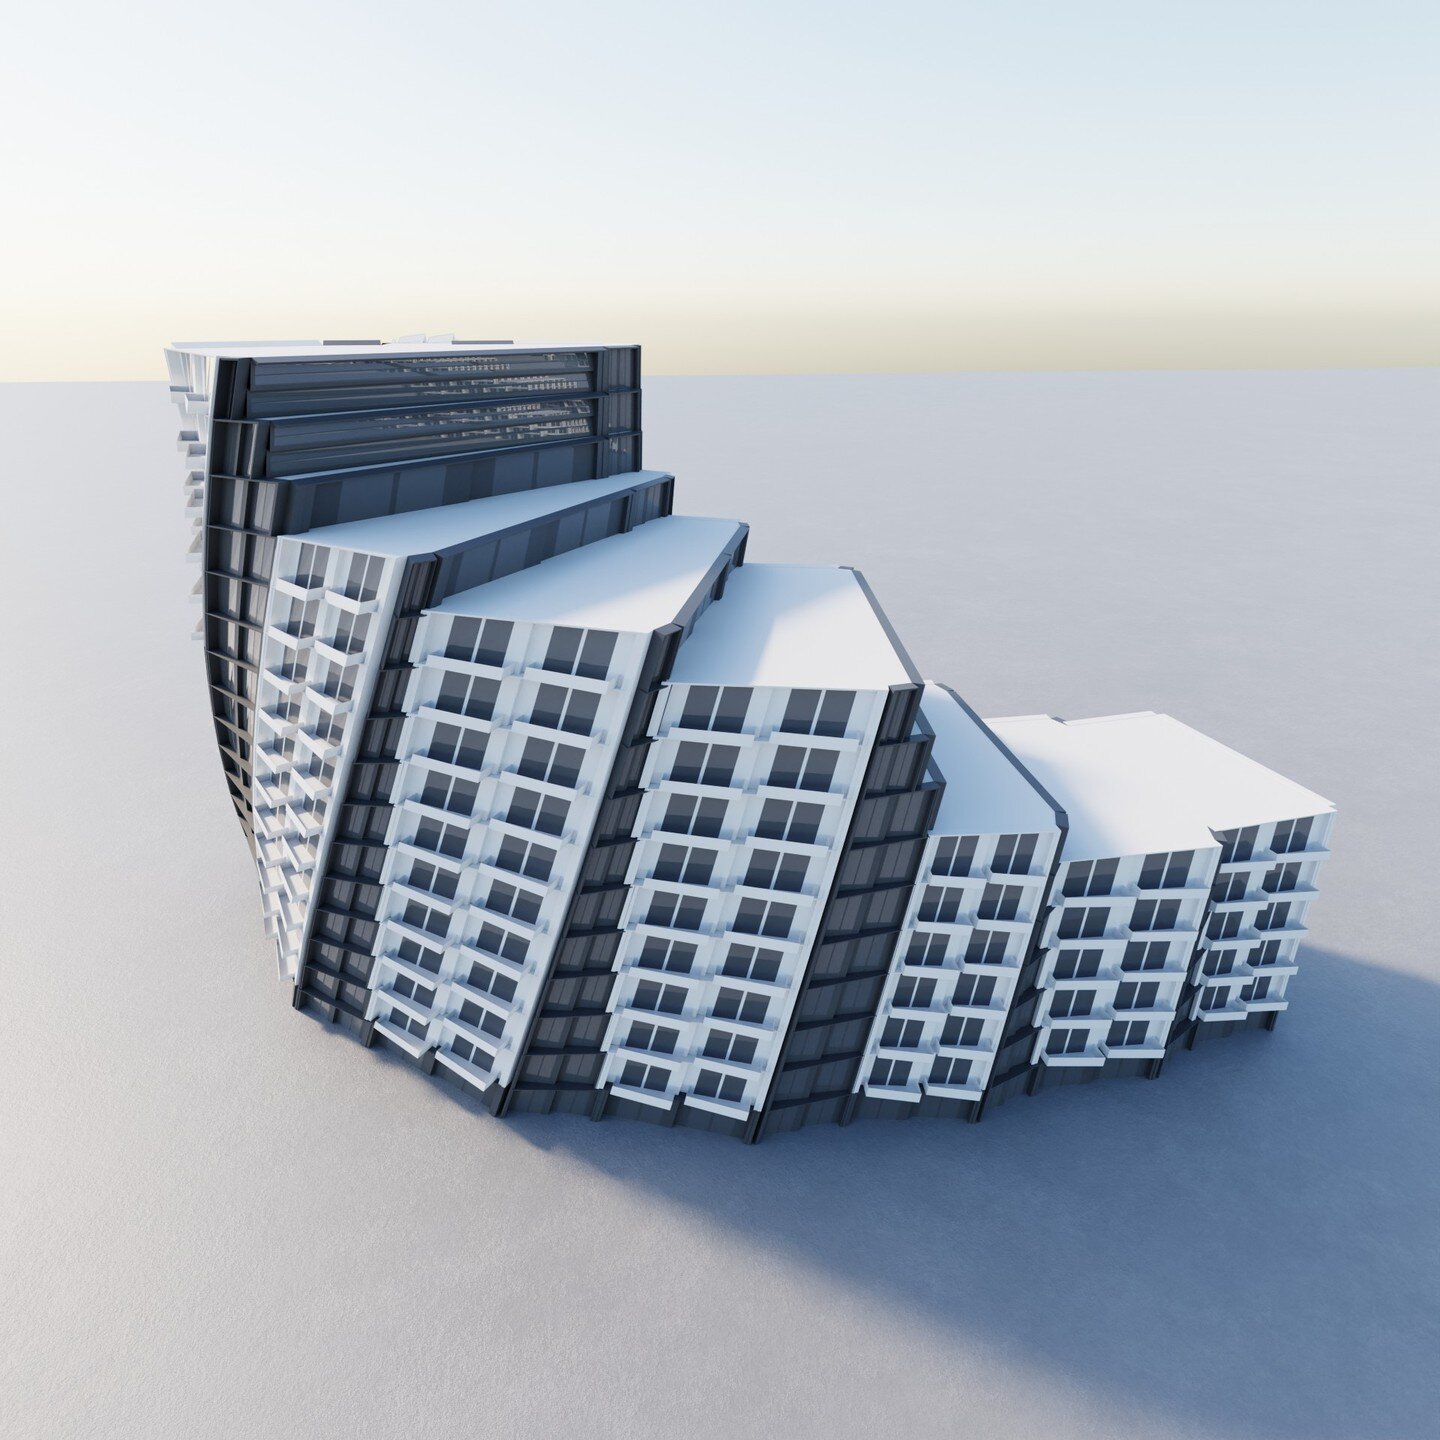 New Course! Staggered Building Forms! The following images show the final result of the course process. The last image shows a part of the overview of the progress

Go to 👉 uhstudio.academy or 🔗 link in bio to find out more. With Blender and Geomet